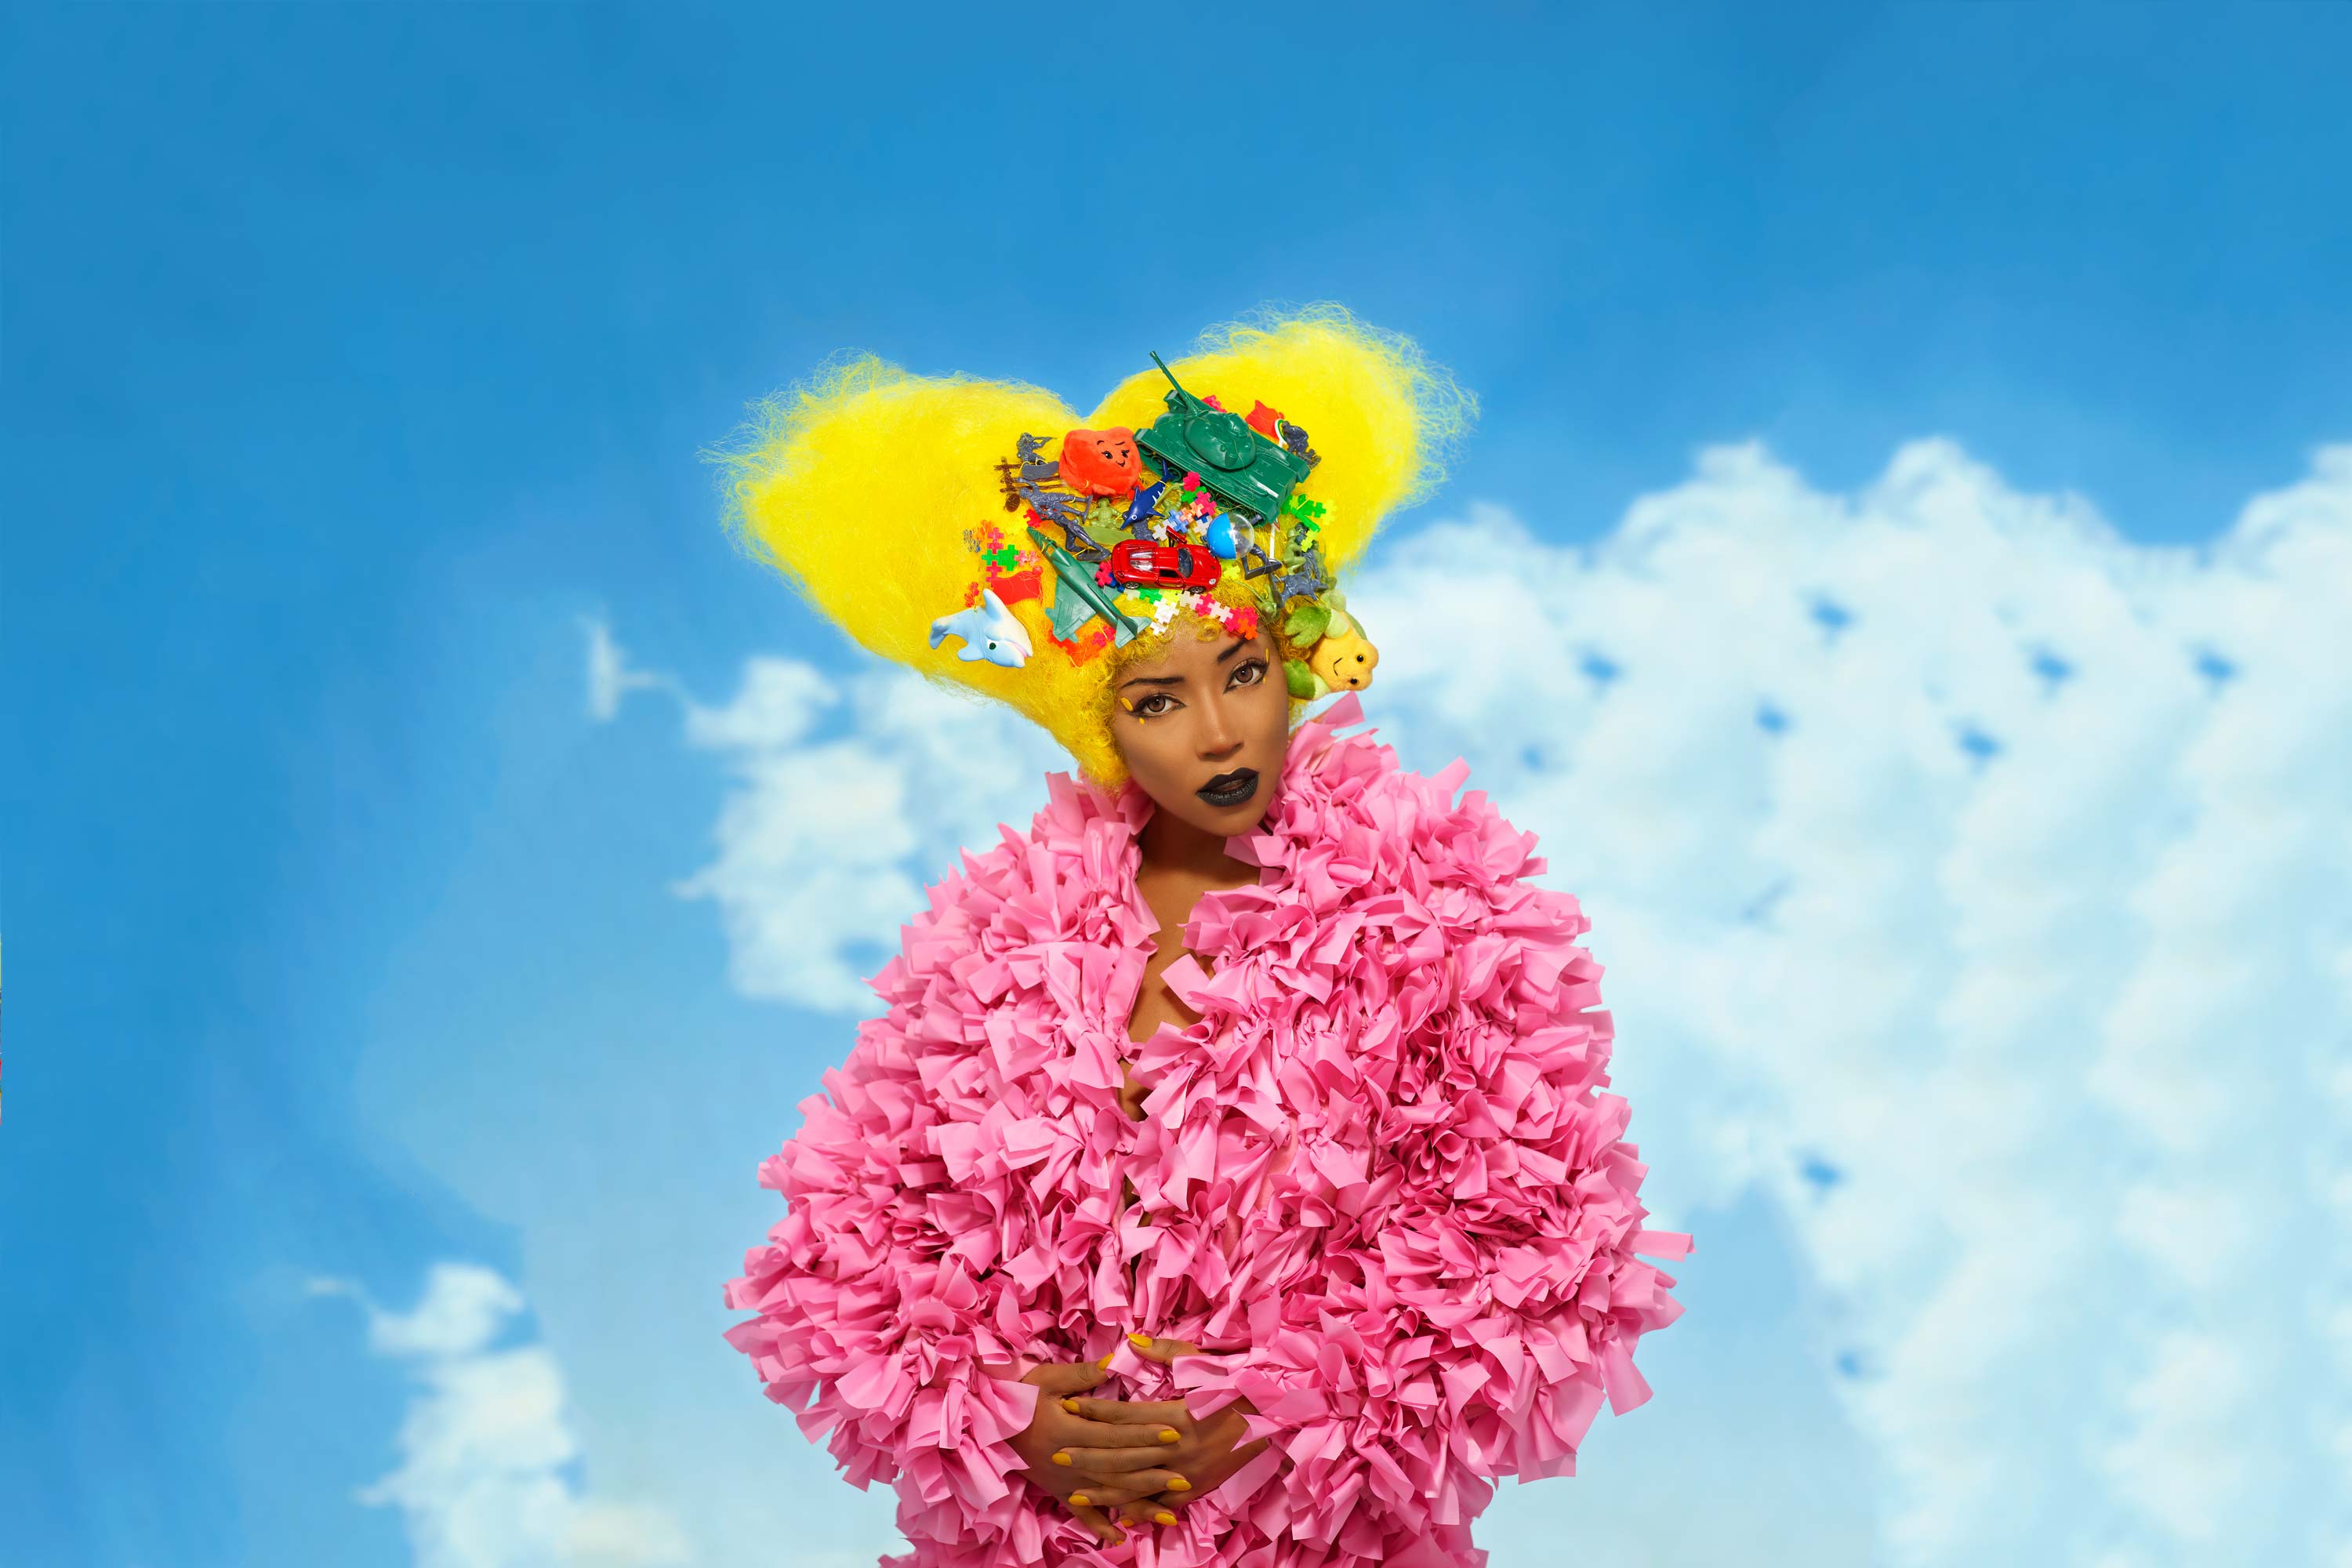 Ebony Bones Is Finding Truth And Beauty In A Messed Up World